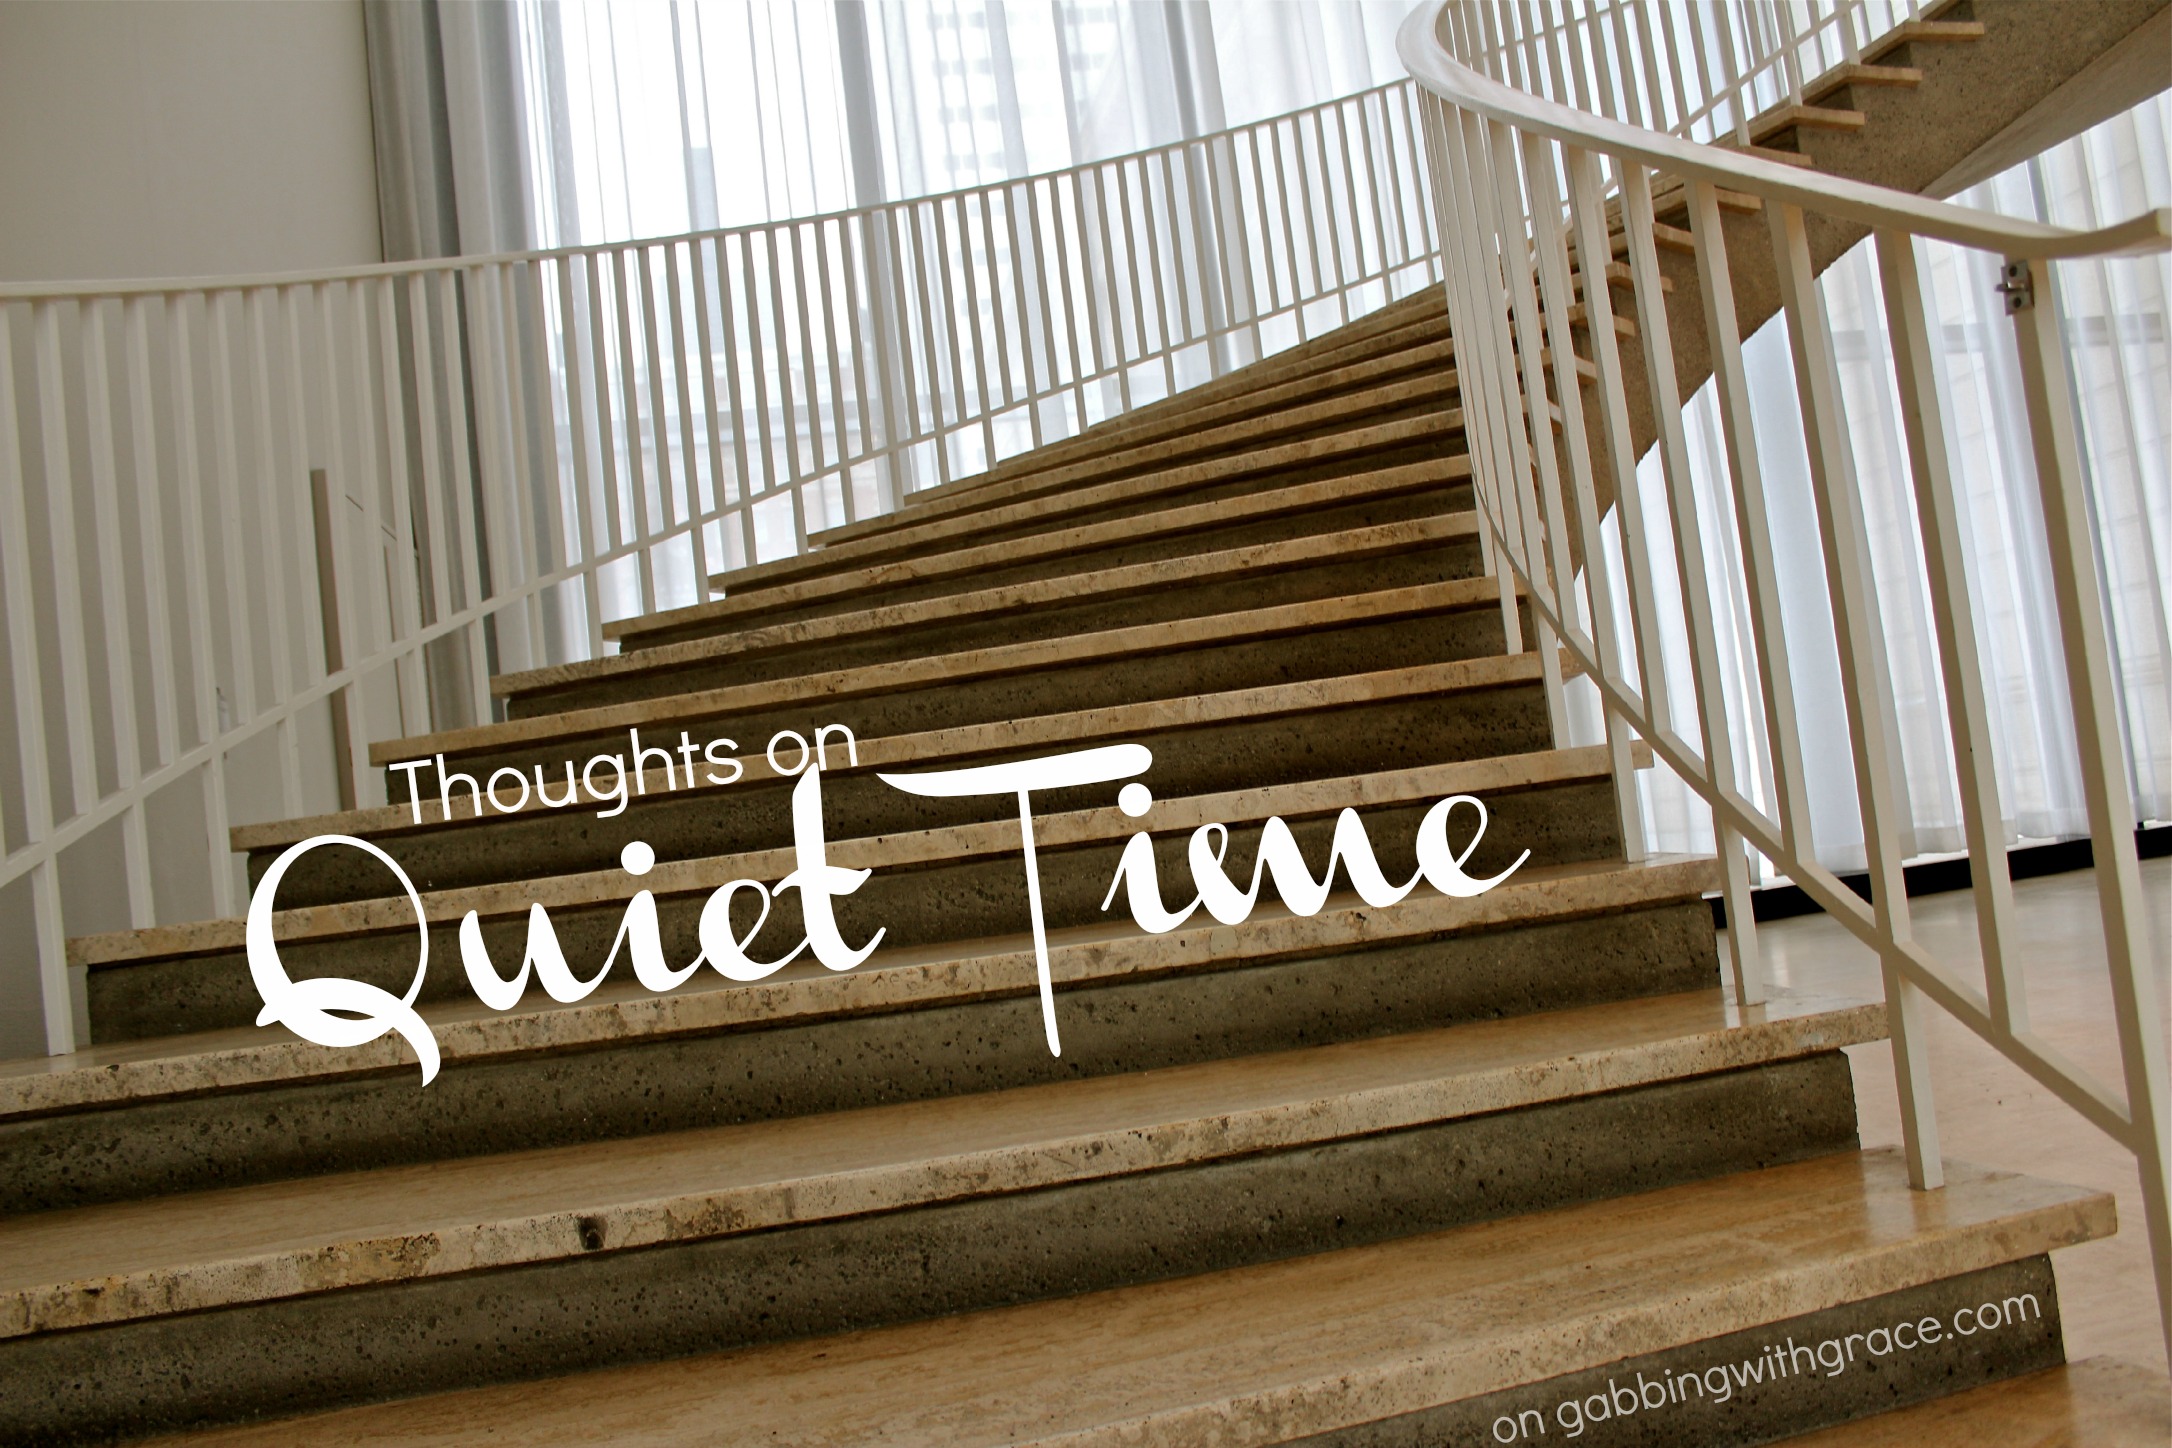 More thoughts on quiet time